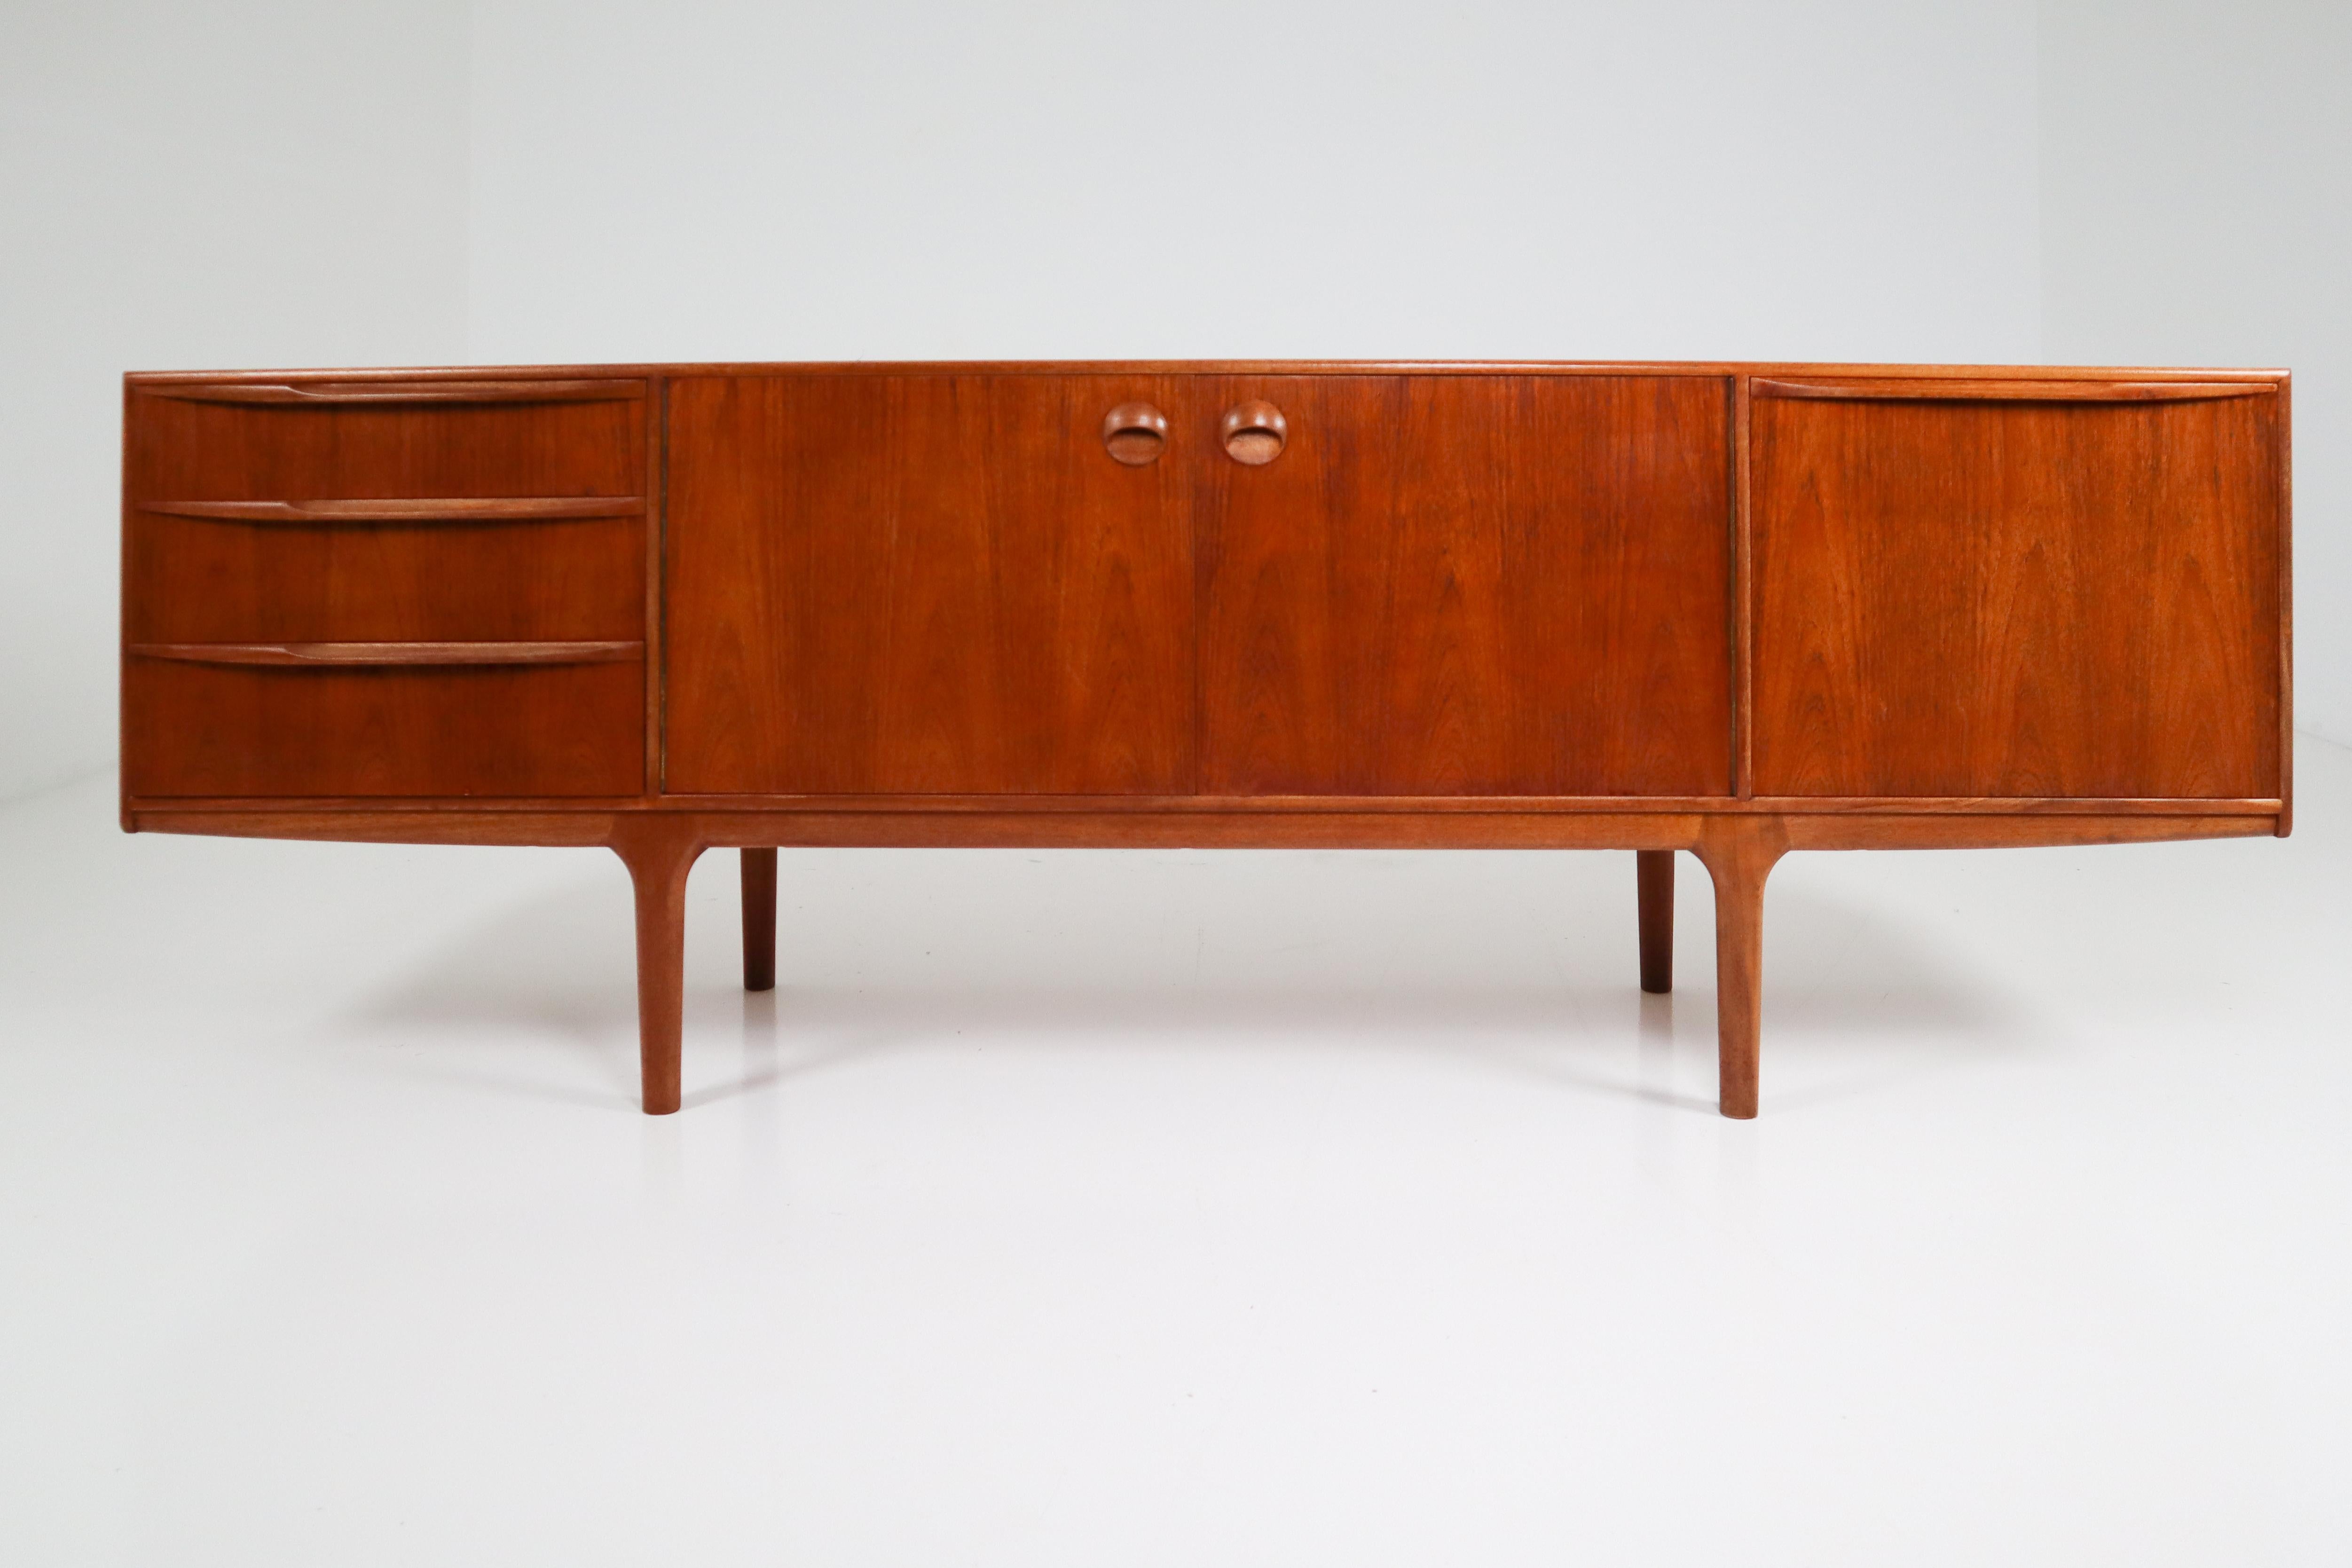 This beautiful vintage modern sideboard features plenty of room for storage within its four drawers and two large storage compartments hidden by cabinet doors. Sleek two-tone design with unique carved pulls and tapered legs adding to the allure.